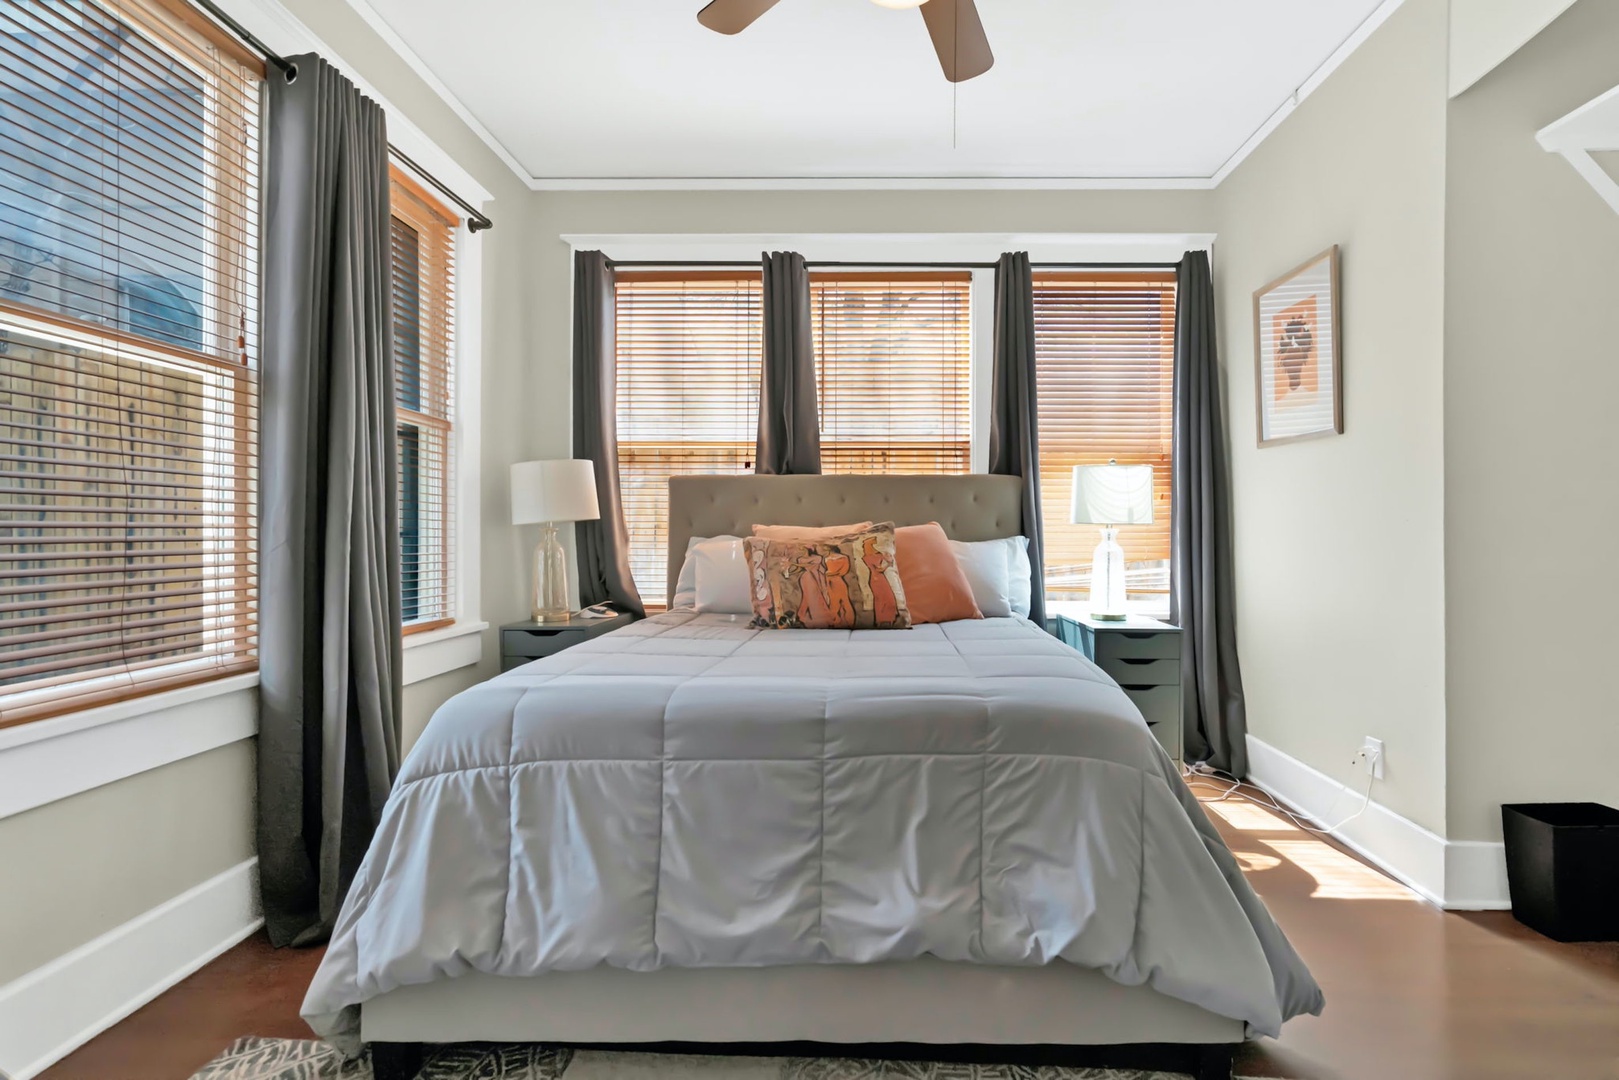 The second bedroom sanctuary offers a regal queen bed & lots of natural light